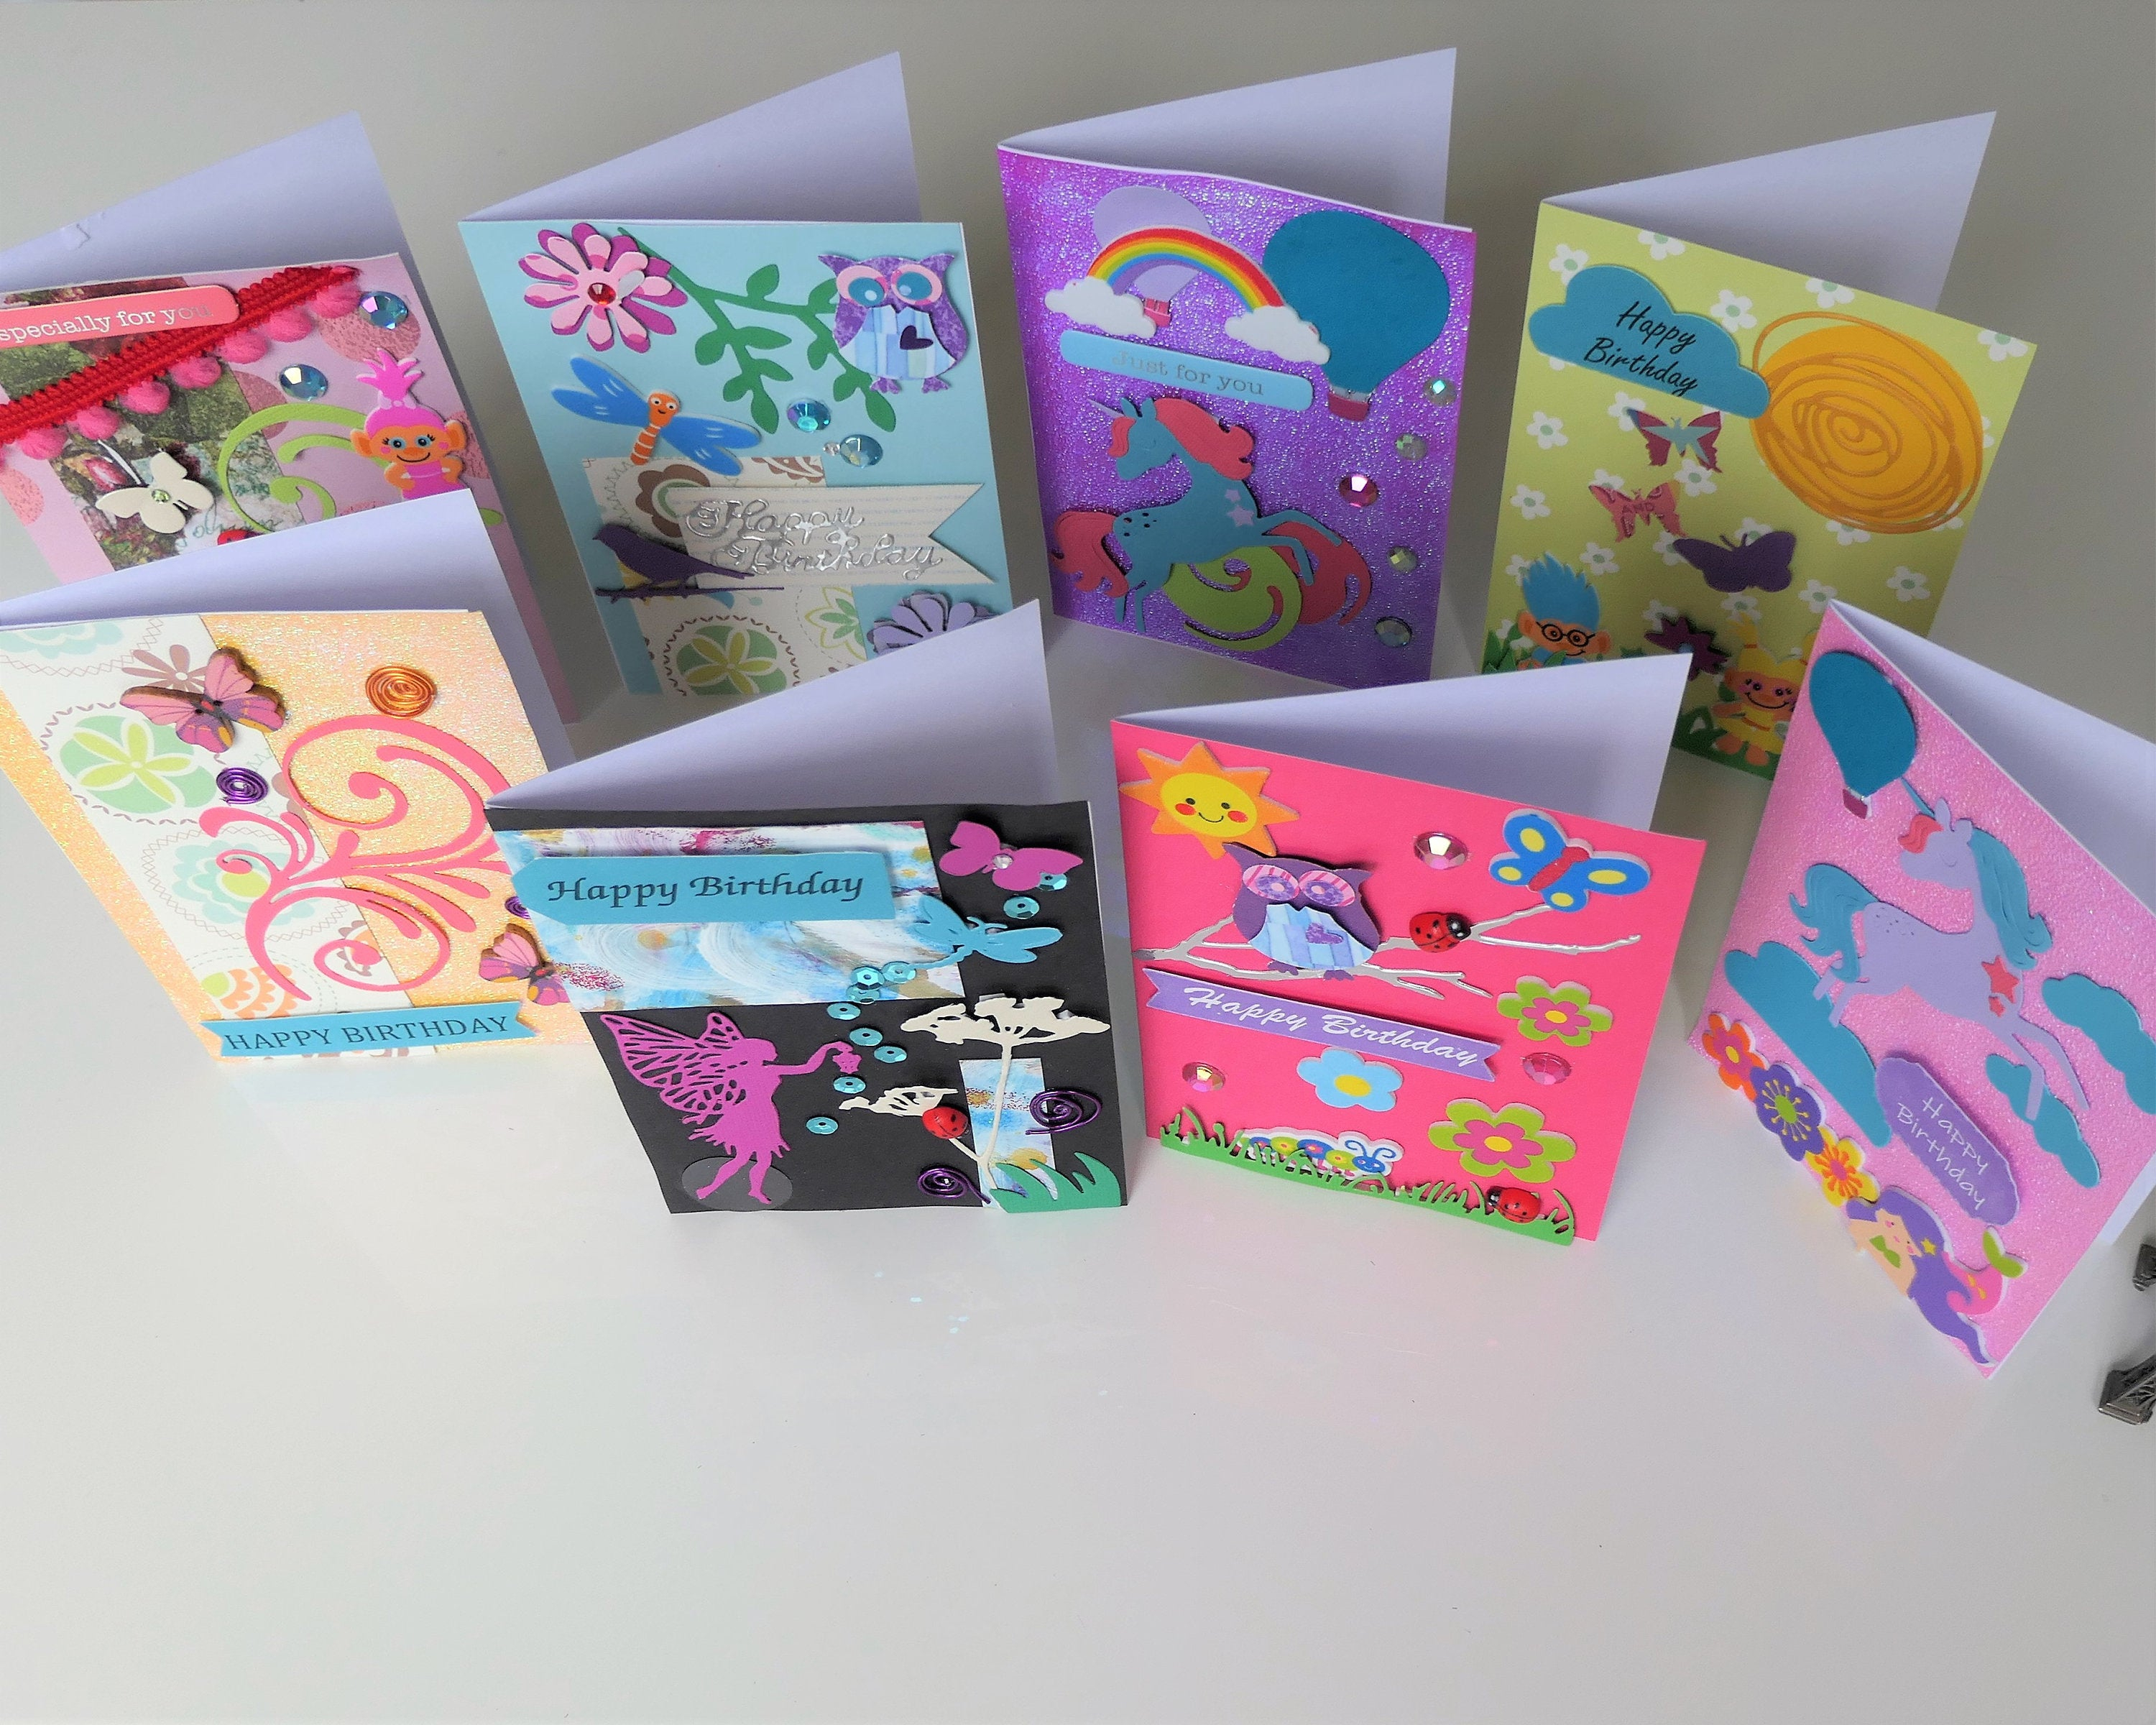 Birthday Card Ideas For Kids Kids Birthday Card Making Kit Gardens And Fantasy Creatures